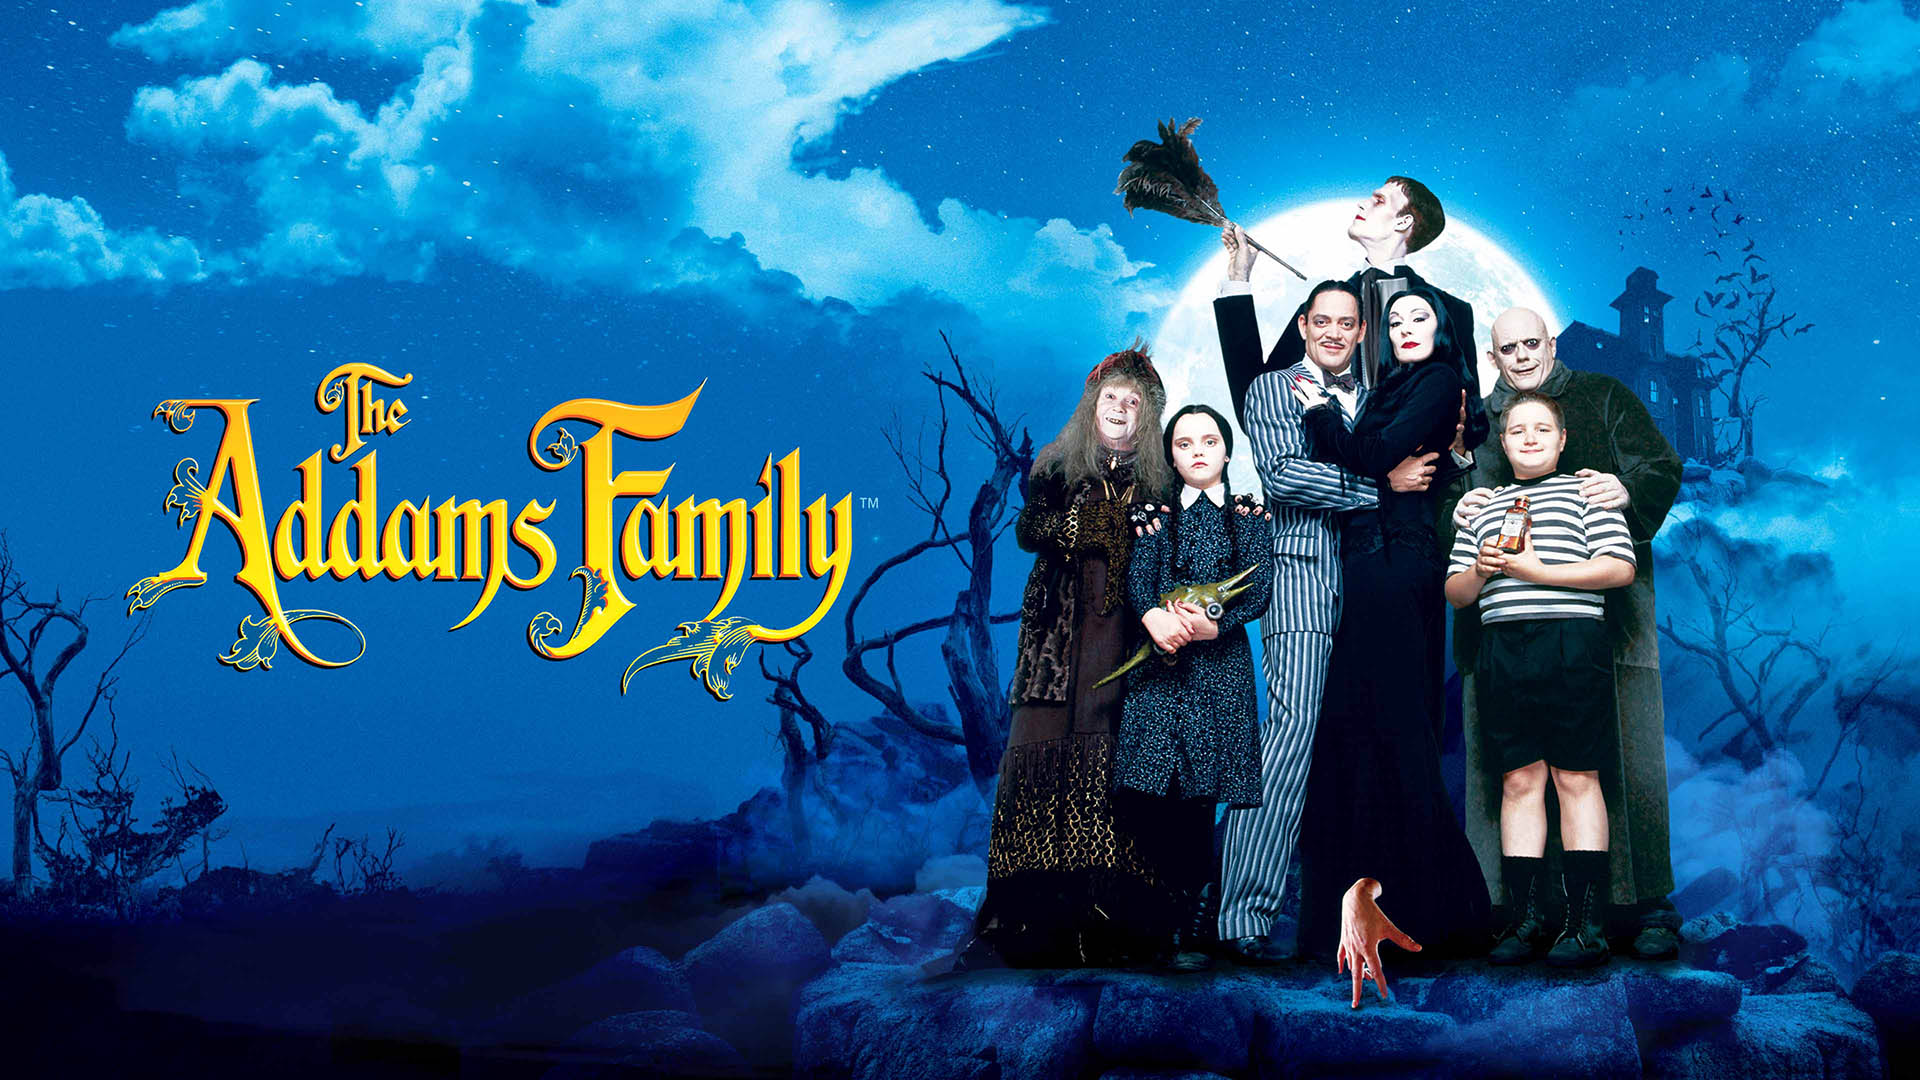 Watch The Addams Family Online | Stream Full Movies